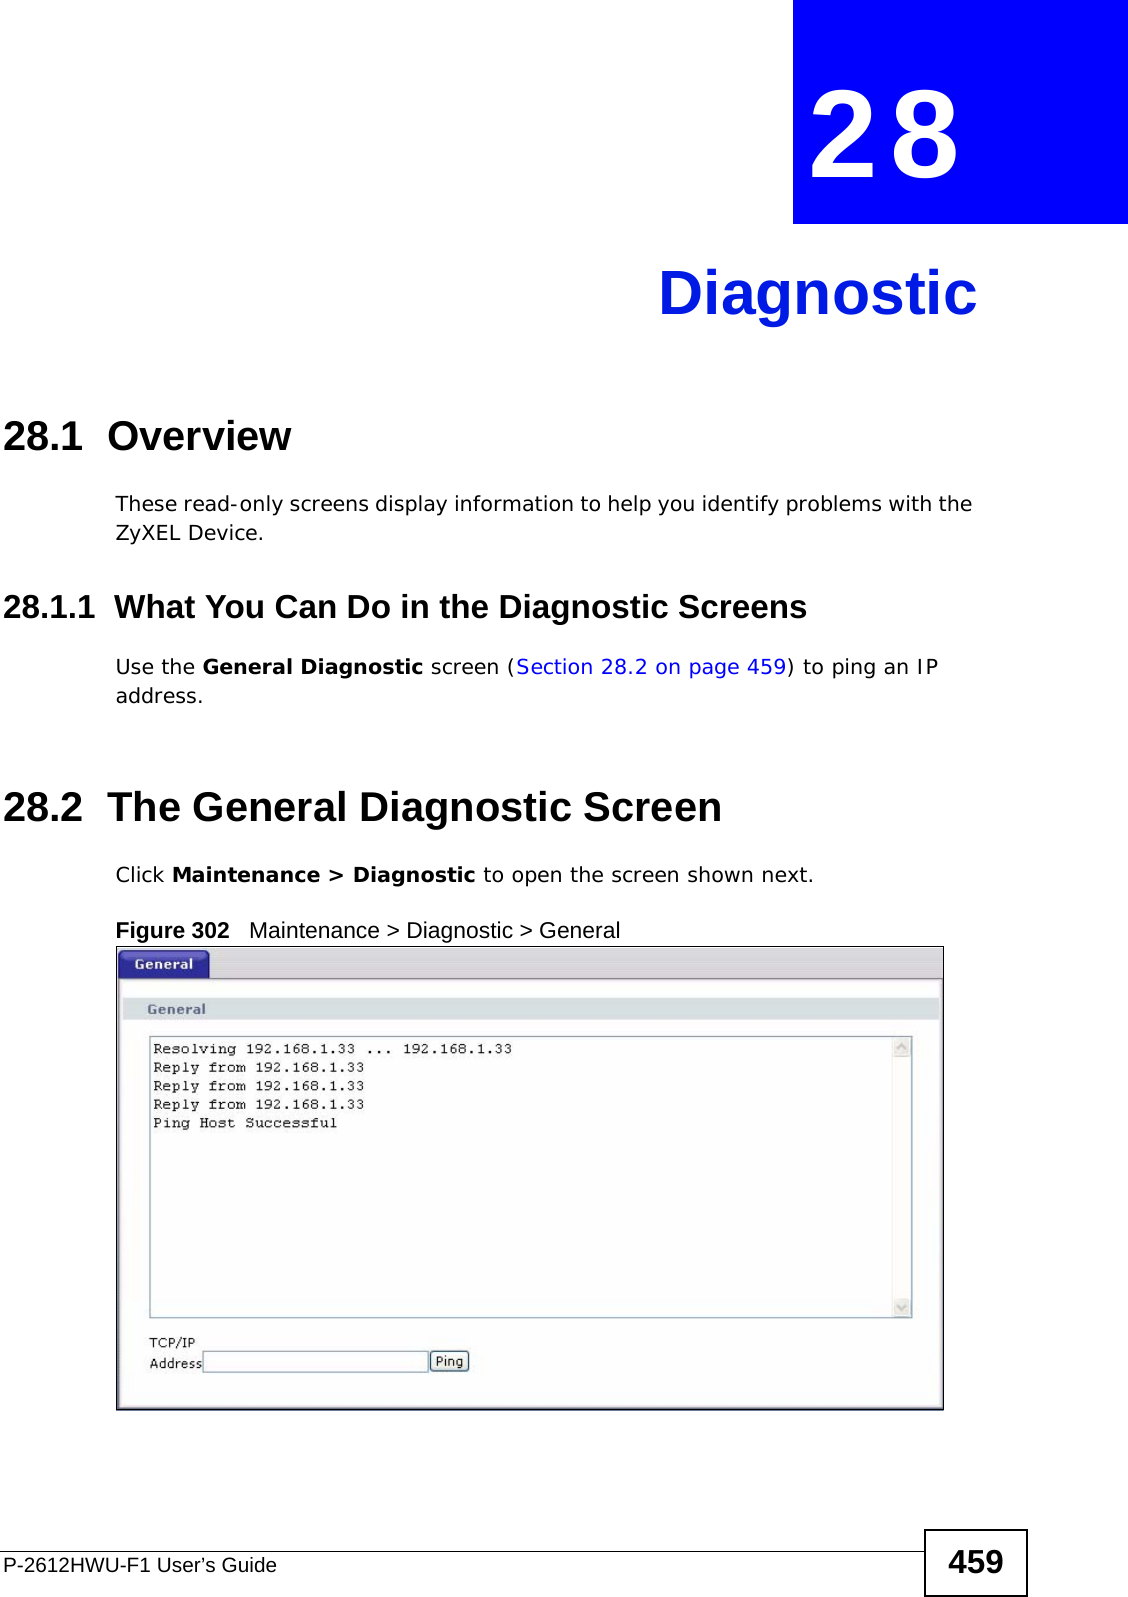 P-2612HWU-F1 User’s Guide 459CHAPTER  28 Diagnostic28.1  OverviewThese read-only screens display information to help you identify problems with the ZyXEL Device.28.1.1  What You Can Do in the Diagnostic ScreensUse the General Diagnostic screen (Section 28.2 on page 459) to ping an IP address.28.2  The General Diagnostic Screen Click Maintenance &gt; Diagnostic to open the screen shown next. Figure 302   Maintenance &gt; Diagnostic &gt; General